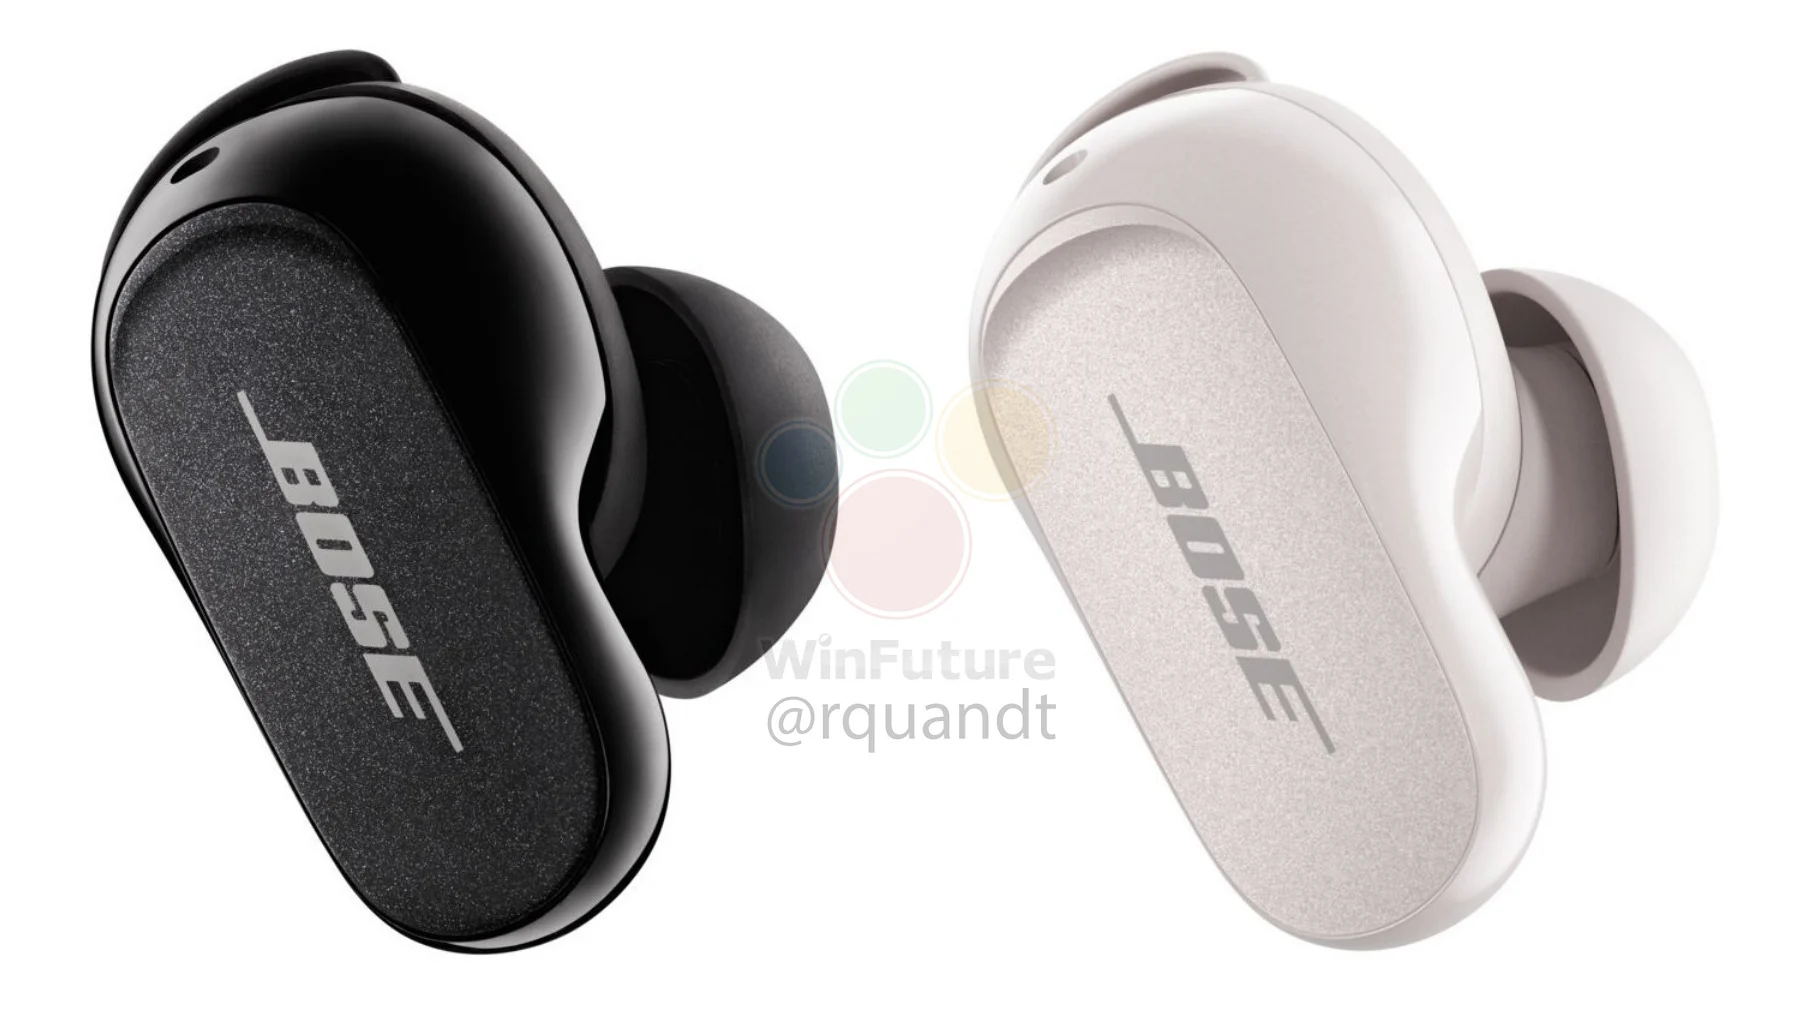 Bose QuietComfort Earbuds II: Specifications and price for next